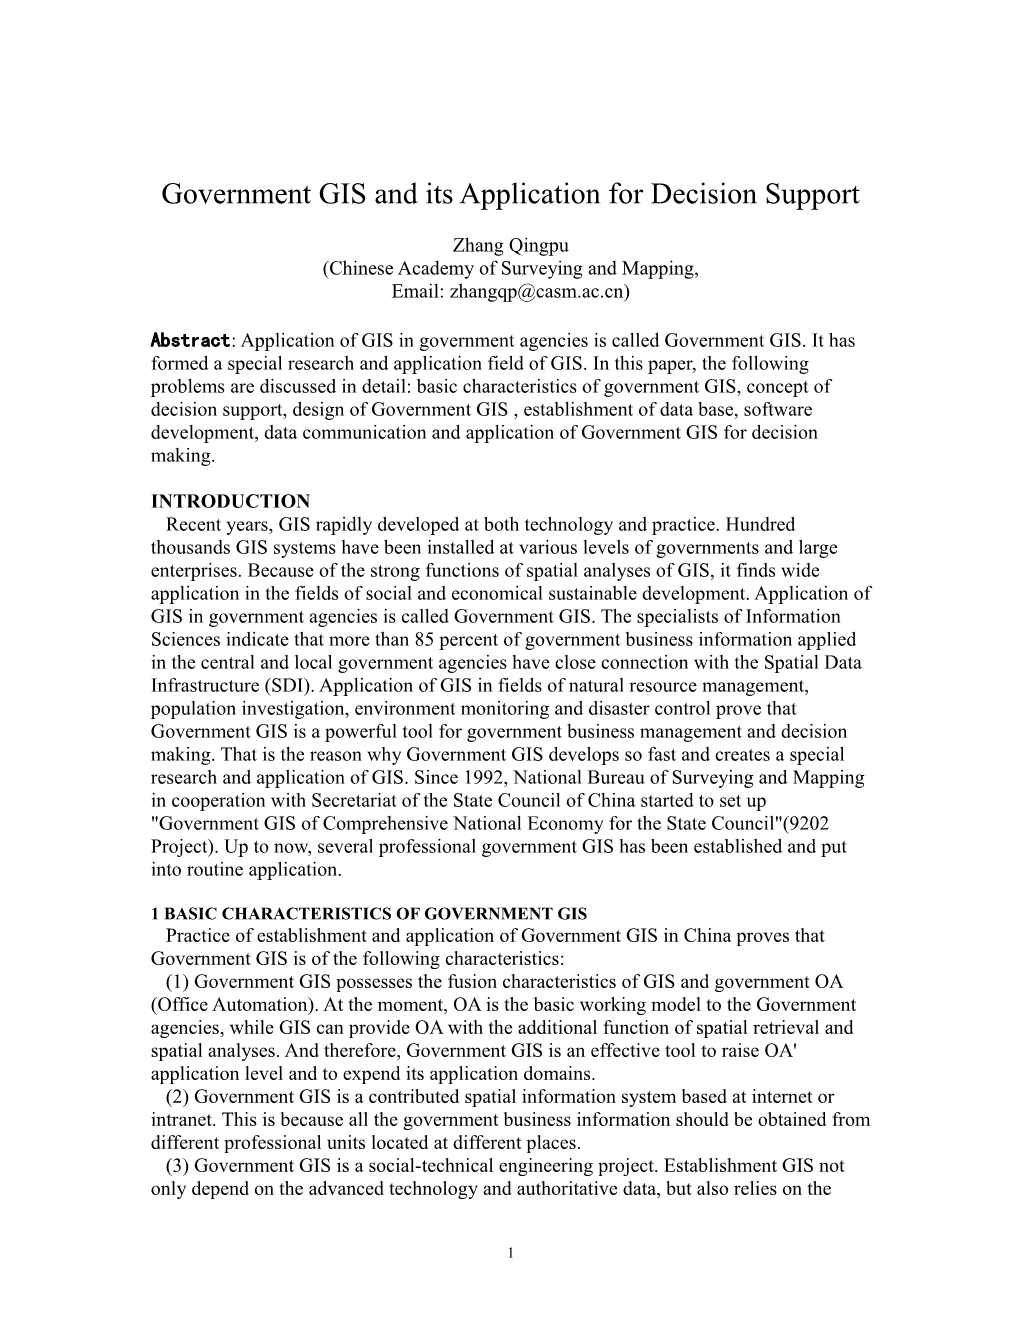 Establishment of Government GIS and Its Application